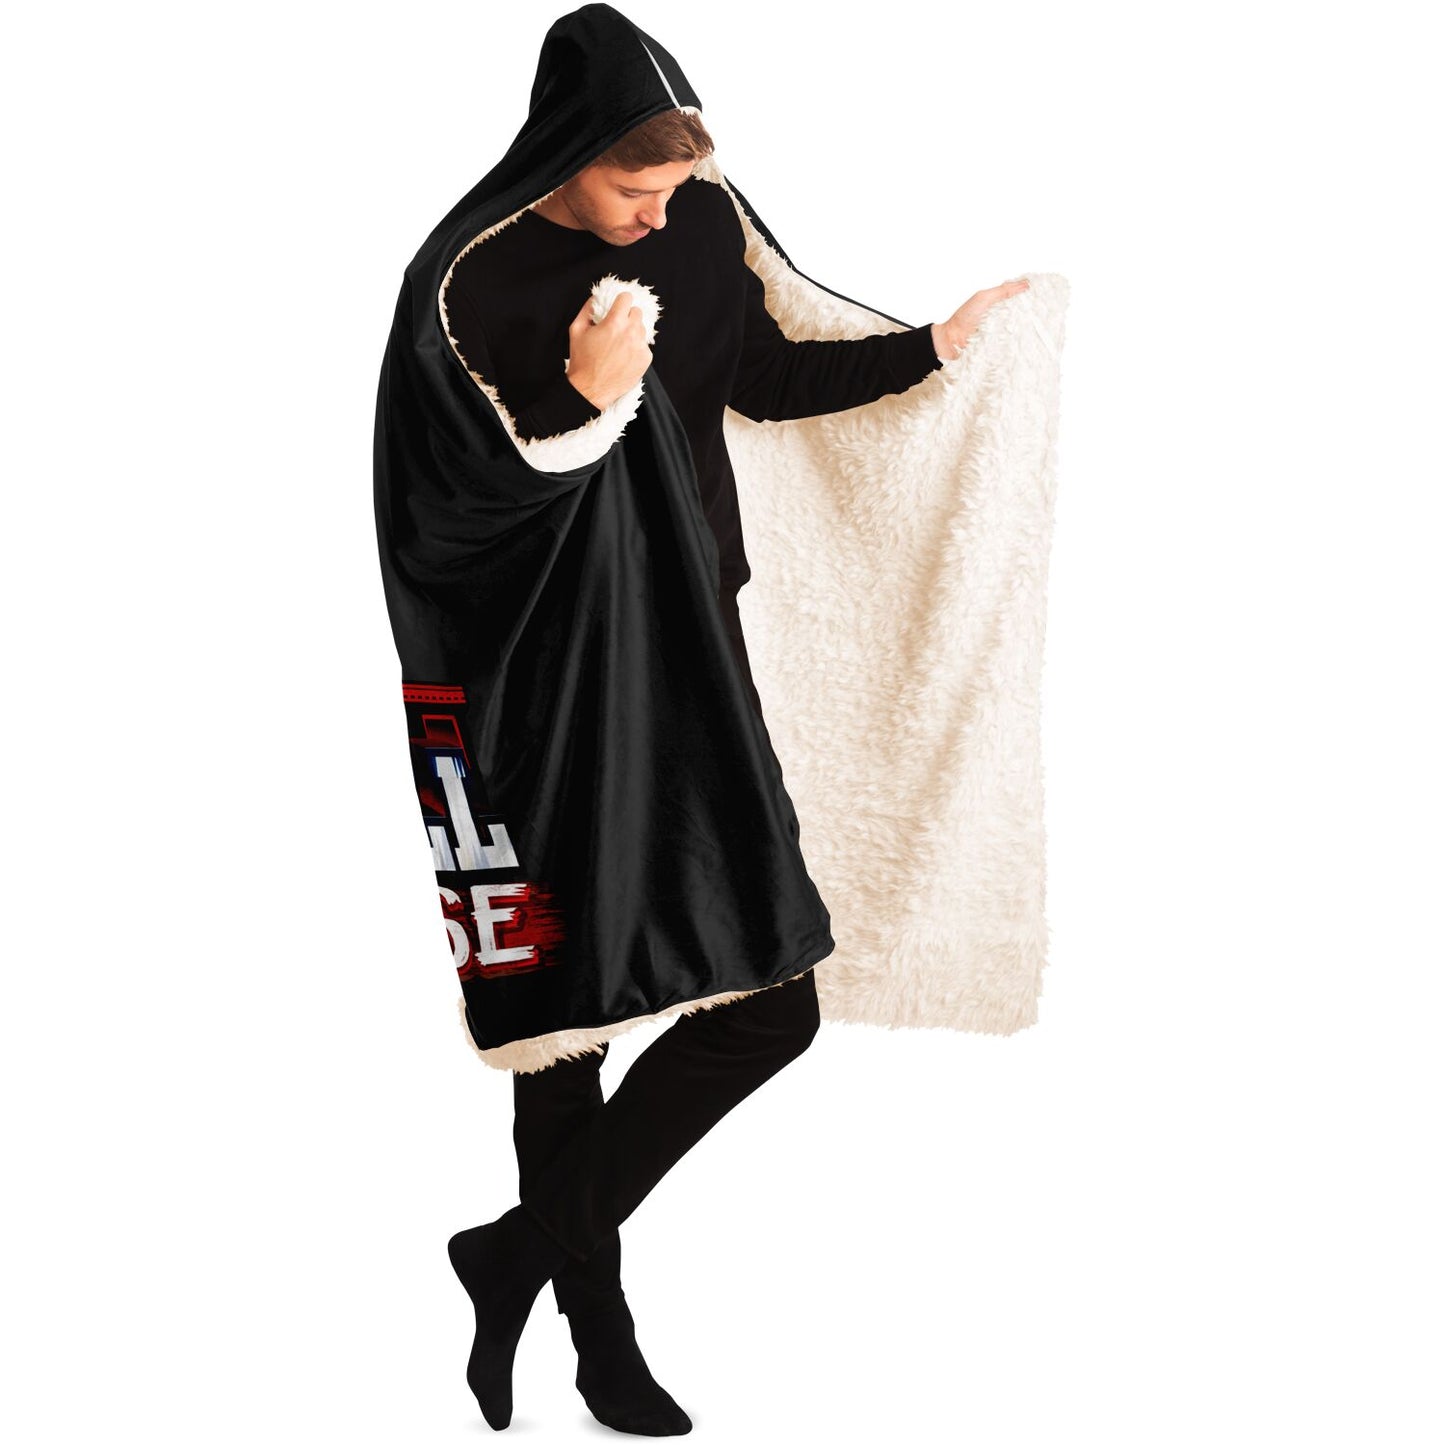 Lincoln Mill Haunted House Hooded Blanket